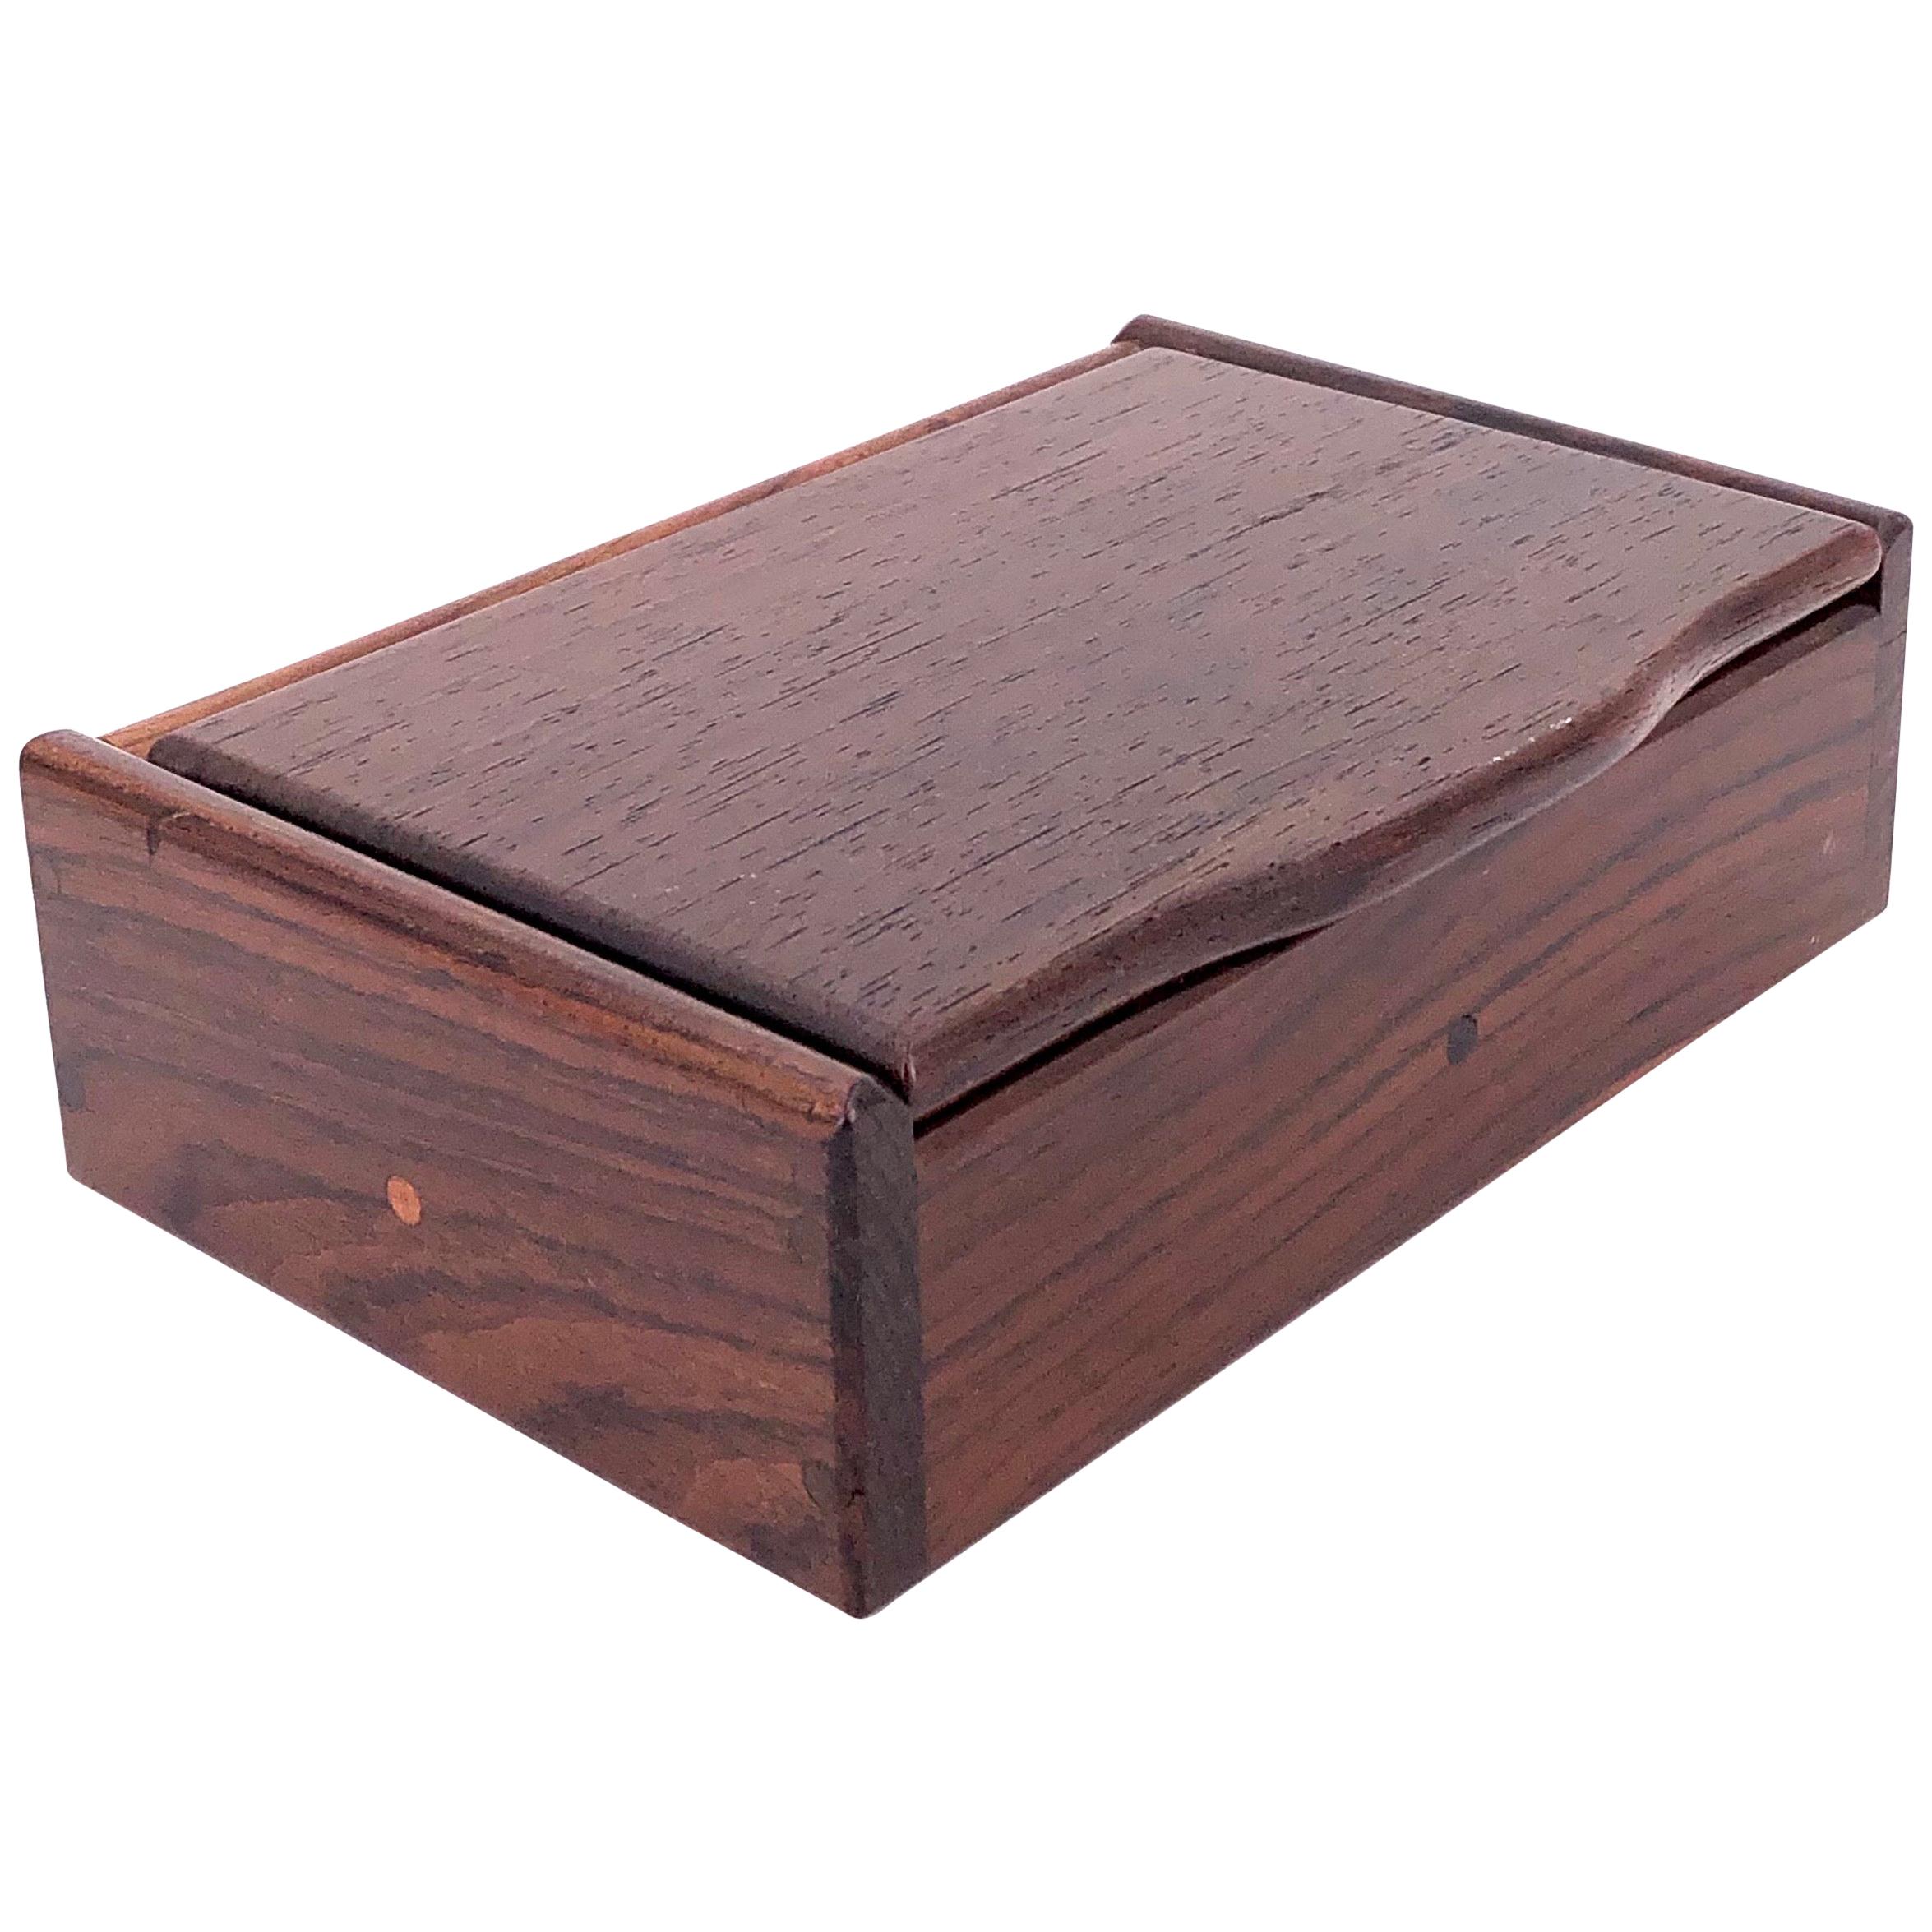 American Handcrafted Rosewood Solid Wood Jewelry Box